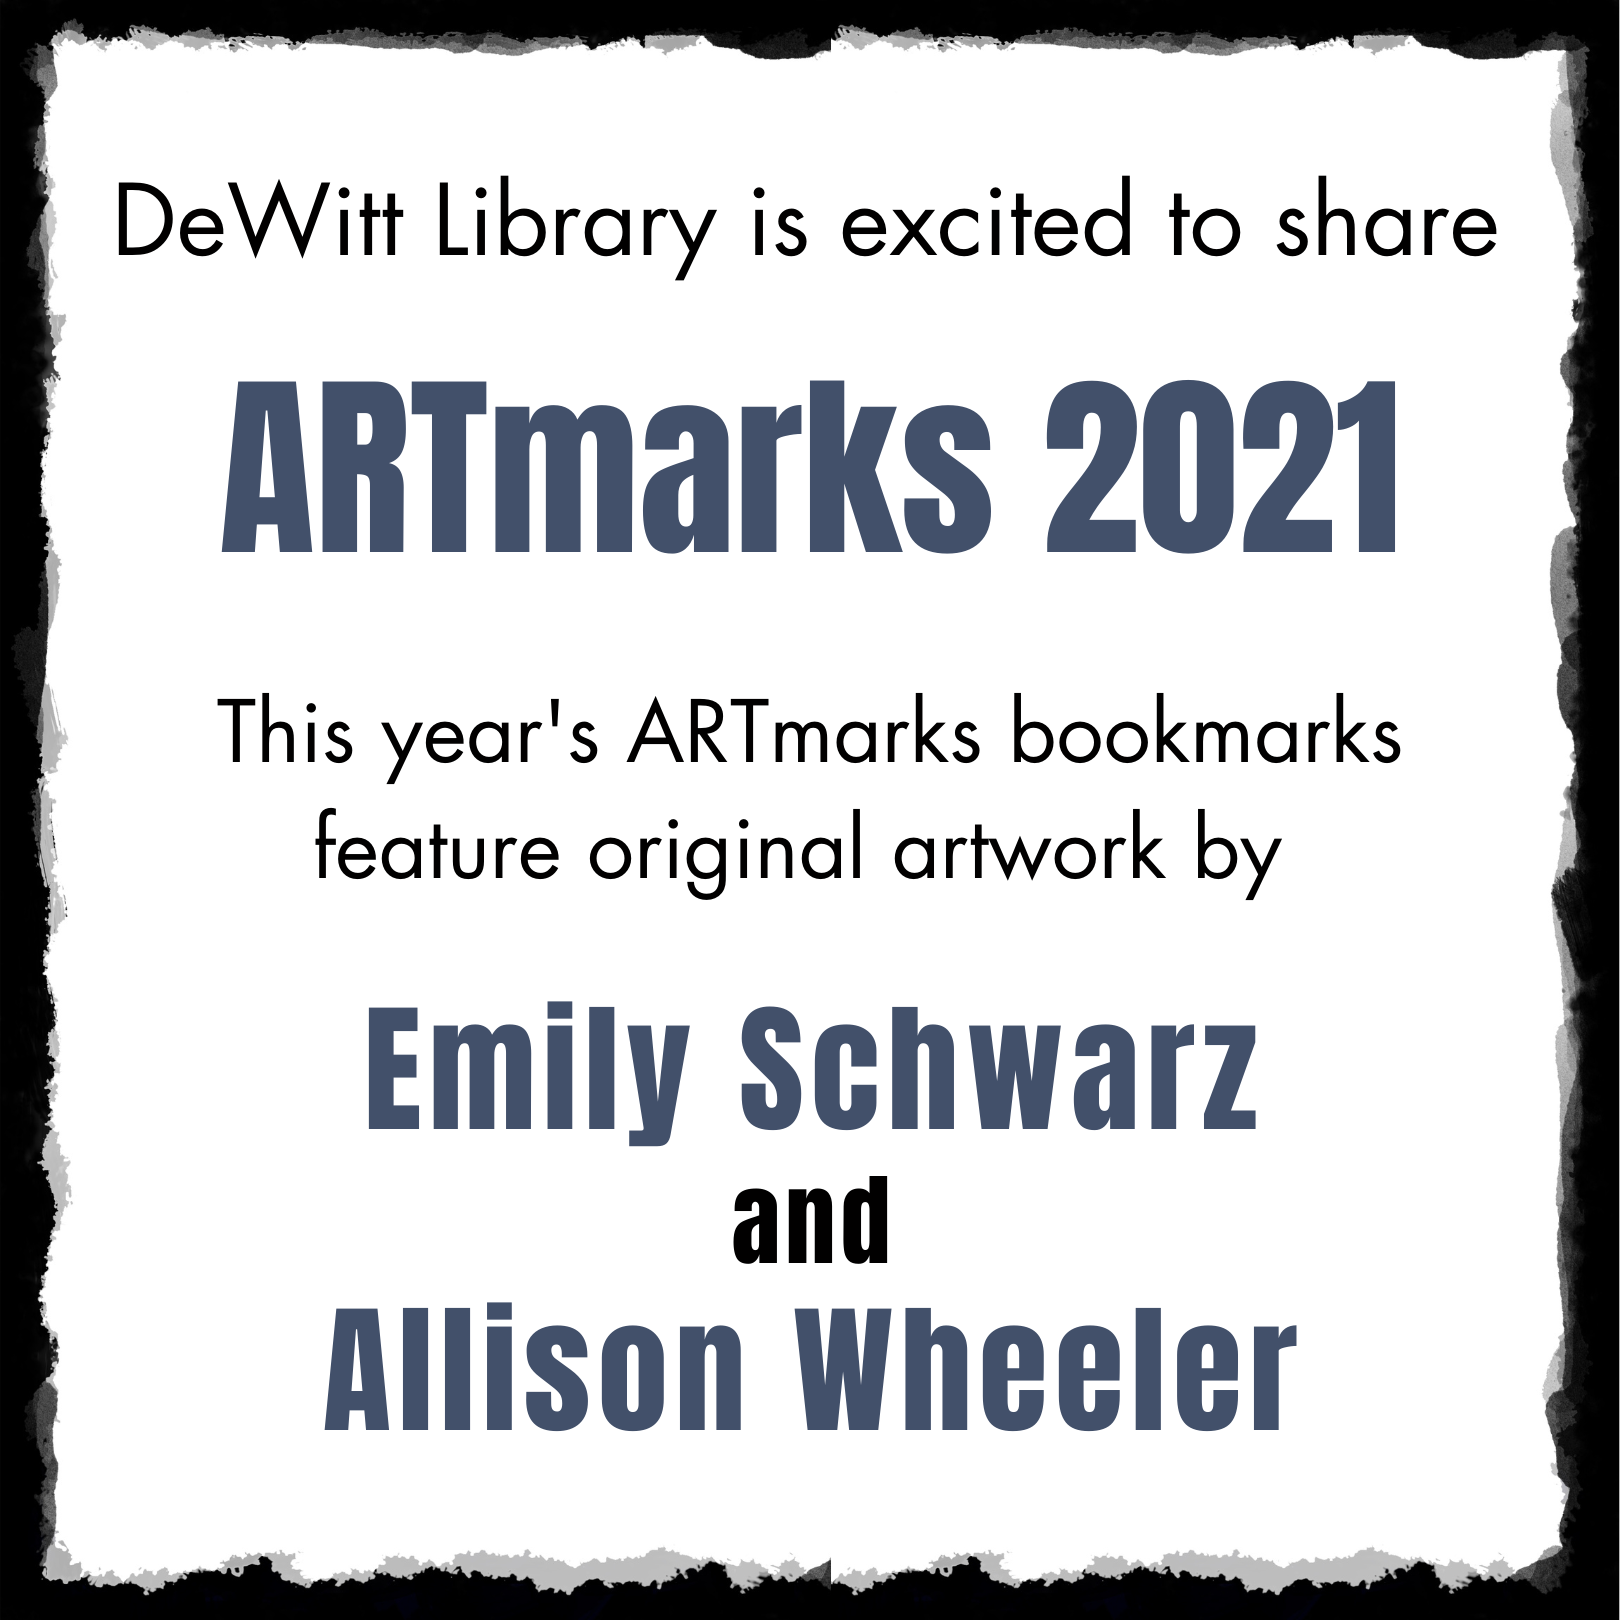 DeWitt Library is excited to share ARTmarks 2021.  This year's ARTmarks bookmarks feature original artwork by Emily Schwarz and Allison Wheeler.